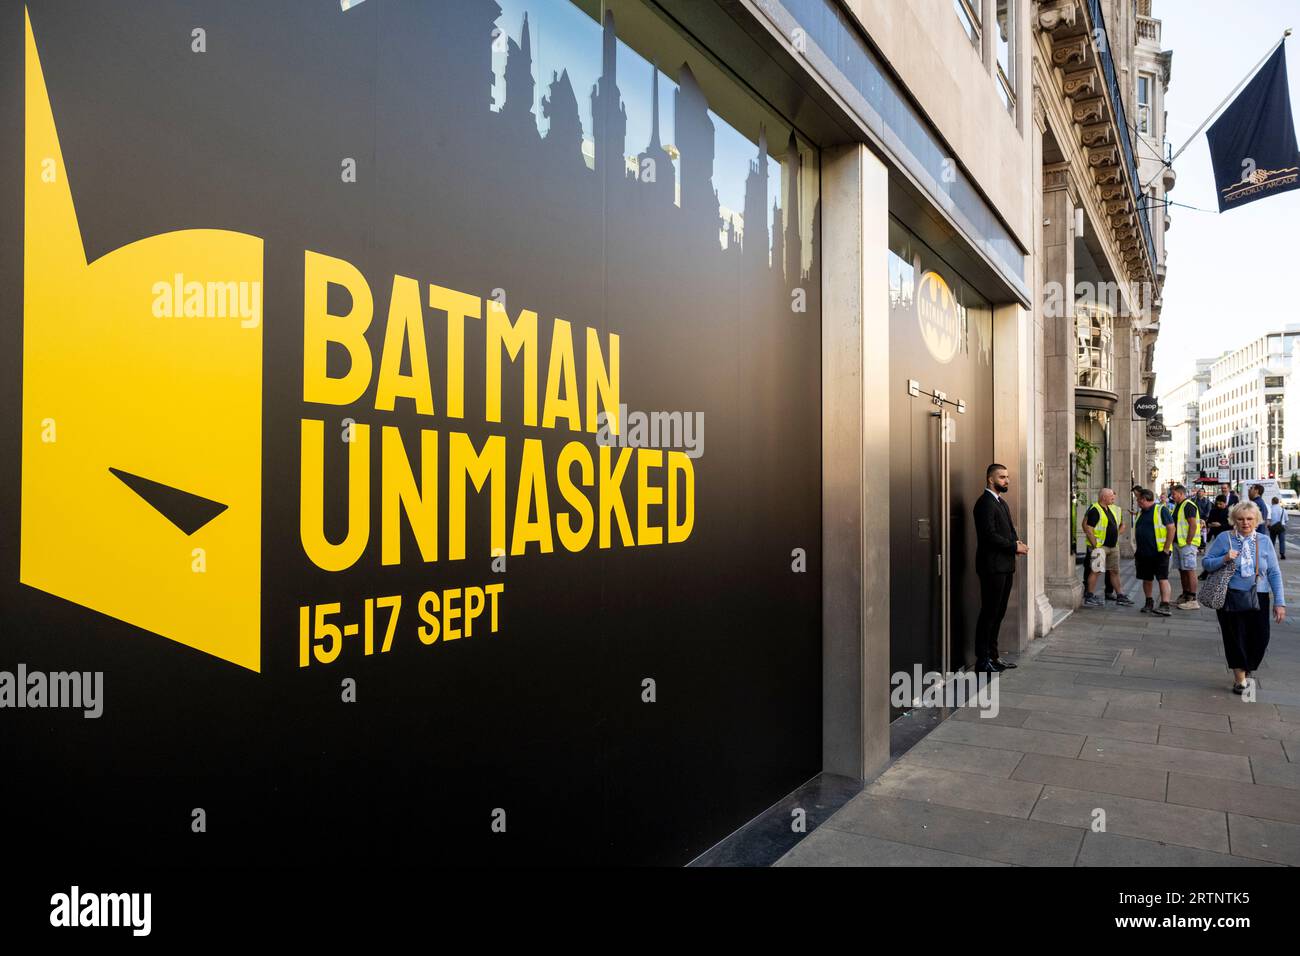 London, UK.  14 September 2023.  Exterior signage at the preview of Batman Unmasked at 180 Piccadilly.  Marking global Batman Day, The Caped Crusader’s legendary history is celebrated through rare comics from Batman’s beginnings, to his appearance in TV, movies, videogames and more.  The show is open to the public 15 to 17 September.  Credit: Stephen Chung / Alamy Live News Stock Photo